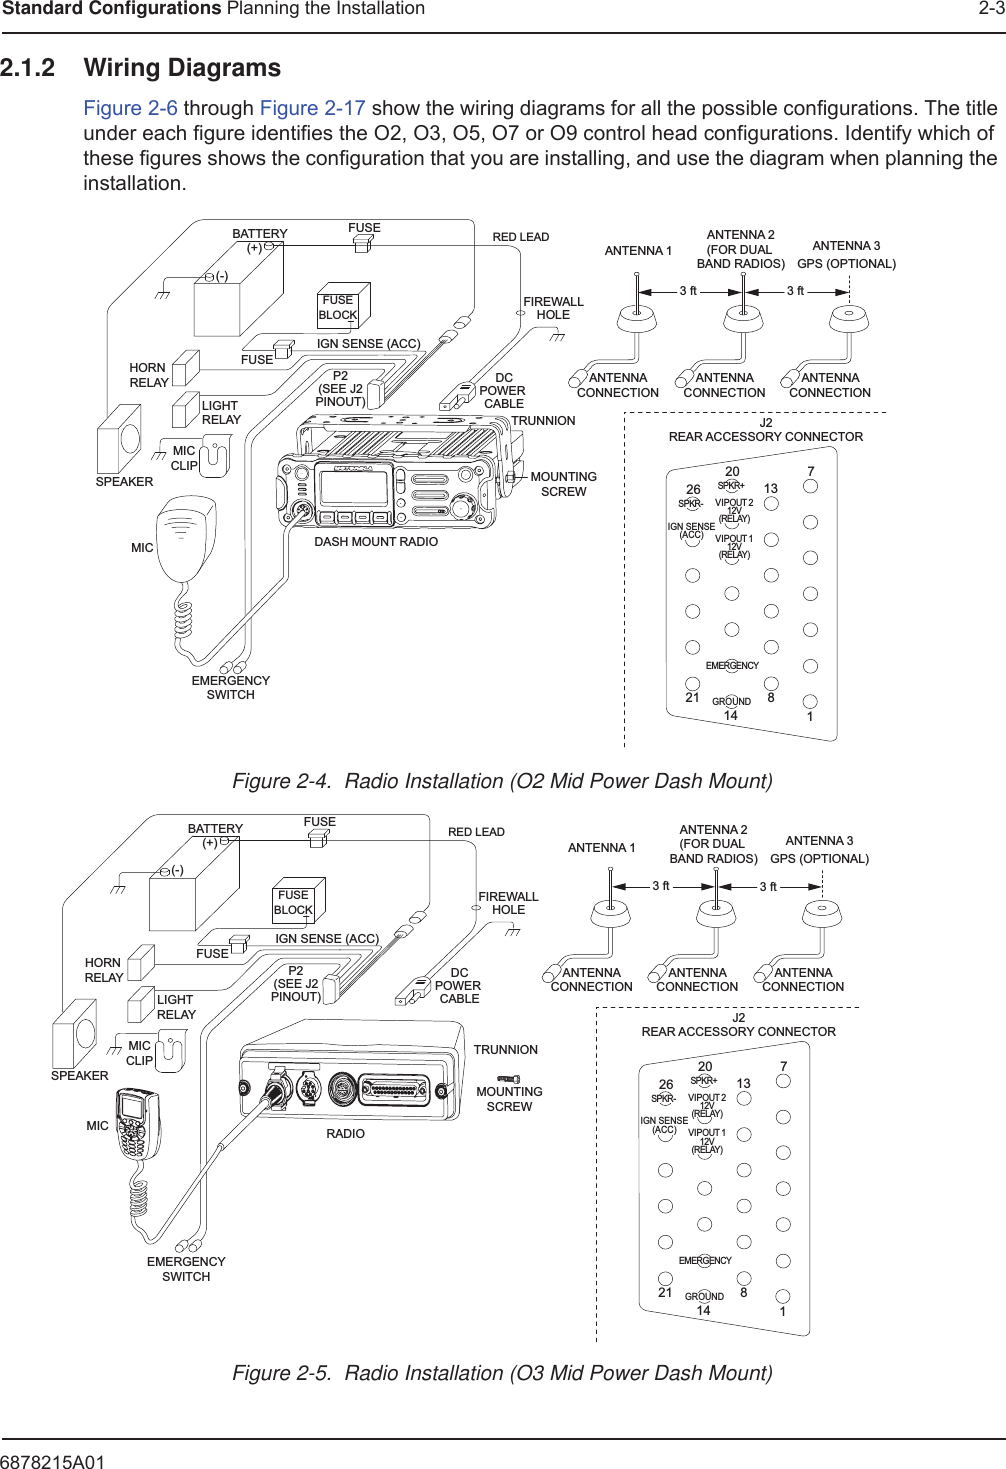 6878215A01Standard Configurations Planning the Installation 2-32.1.2 Wiring DiagramsFigure 2-6 through Figure 2-17 show the wiring diagrams for all the possible configurations. The title under each figure identifies the O2, O3, O5, O7 or O9 control head configurations. Identify which of these figures shows the configuration that you are installing, and use the diagram when planning the installation.Figure 2-4.  Radio Installation (O2 Mid Power Dash Mount)Figure 2-5.  Radio Installation (O3 Mid Power Dash Mount)BATTERYHORN RELAYLIGHT RELAYMICCLIPSPEAKERMICEMERGENCYSWITCHFUSEFUSEBLOCK(+)(-)RED LEADFUSEFIREWALLHOLEMOUNTINGSCREWDASH MOUNT RADIOANTENNA CONNECTION ANTENNA 13 ftIGN SENSE (ACC)P2(SEE J2PINOUT)DCPOWER CABLETRUNNION J2REAR ACCESSORY CONNECTOR1781413202126SPKR-SPKR+VIPOUT 212V(RELAY)VIPOUT 112V(RELAY)GROUNDEMERGENCYIGN SENSE(ACC)ANTENNA CONNECTION ANTENNA 2(FOR DUAL BAND RADIOS)ANTENNA CONNECTION ANTENNA 3GPS (OPTIONAL)3 ftBATTERYHORN RELAYLIGHT RELAYMICCLIPSPEAKERMICEMERGENCYSWITCHFUSEFUSEBLOCK(+)(-)RED LEADFUSEFIREWALLHOLEMOUNTINGSCREWRADIOANTENNA CONNECTION ANTENNA 1IGN SENSE (ACC)P2(SEE J2PINOUT)DCPOWER CABLETRUNNIONJ2REAR ACCESSORY CONNECTOR1781413202126SPKR-SPKR+VIPOUT 212V(RELAY)VIPOUT 112V(RELAY)GROUNDEMERGENCYIGN SENSE(ACC)ANTENNA CONNECTION ANTENNA 2(FOR DUAL BAND RADIOS)ANTENNA CONNECTION ANTENNA 3GPS (OPTIONAL)3 ft 3 ft